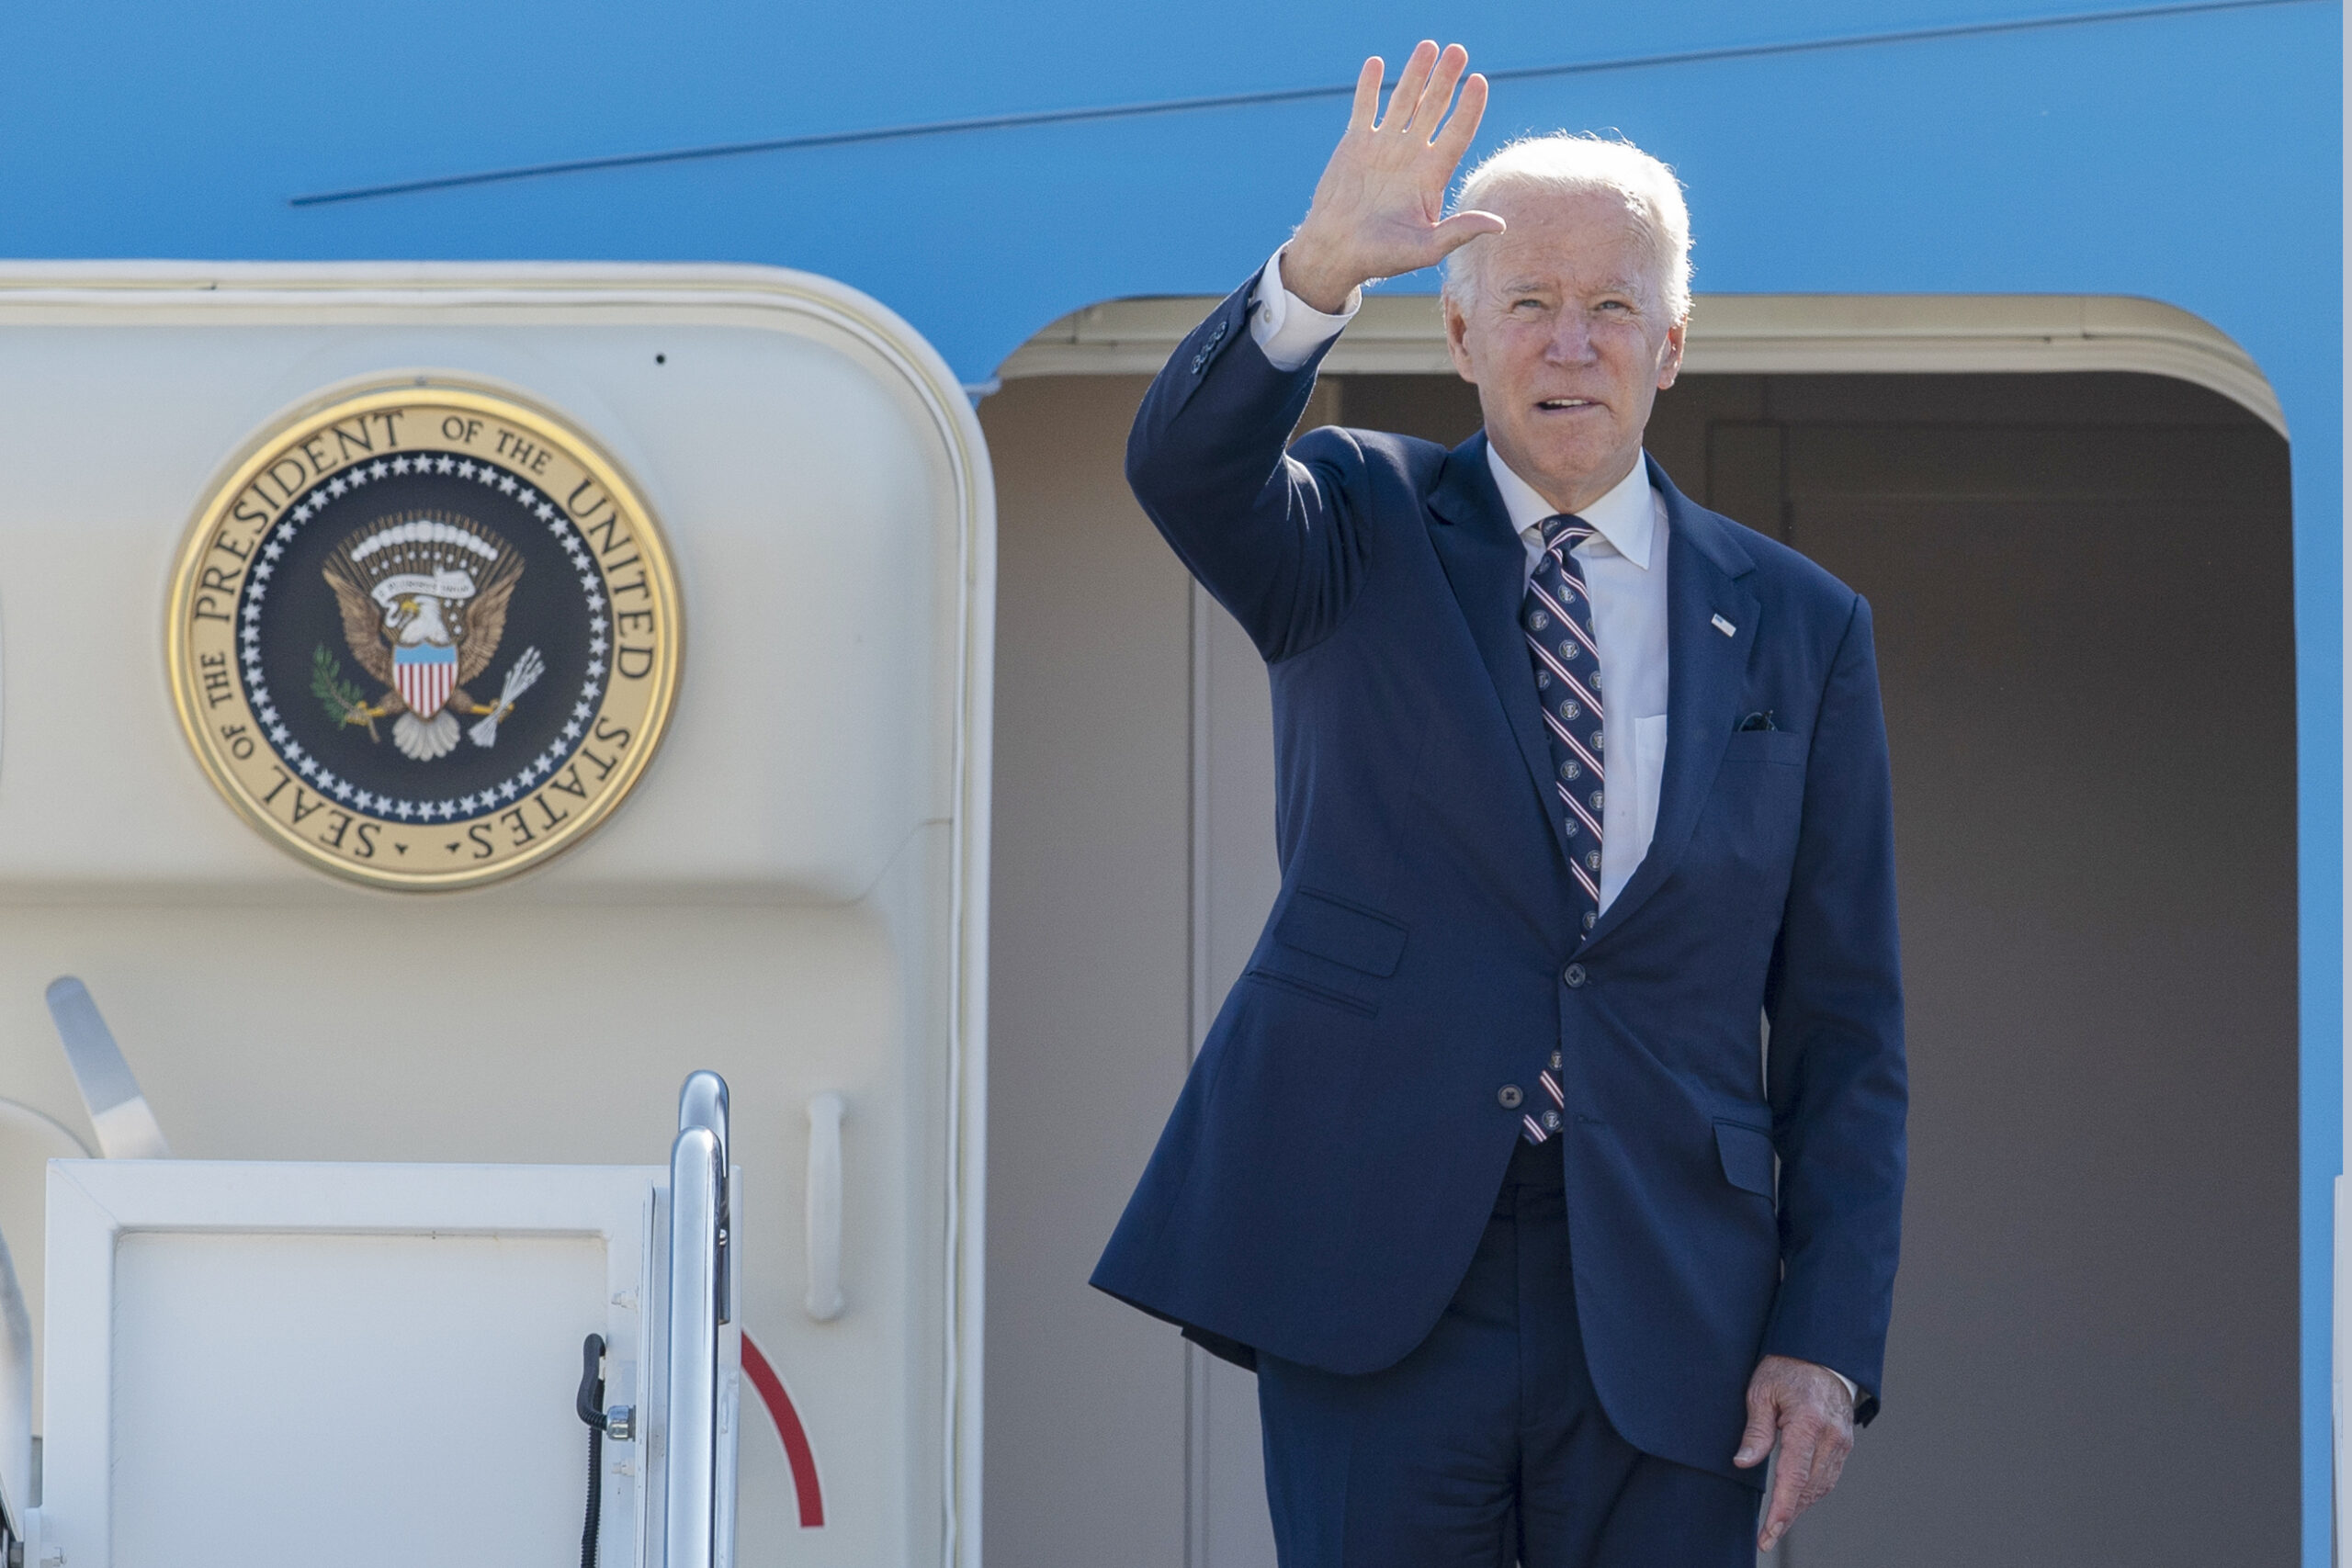 President Joe Biden waves as he boards Air Force One at Andrews Air Force Base, Md., Friday, Sept. 9, 2022, on his way to the groundbreaking of the new Intel semiconductor manufacturing facility in New Albany, Ohio. (AP Photo/Gemunu Amarasinghe)